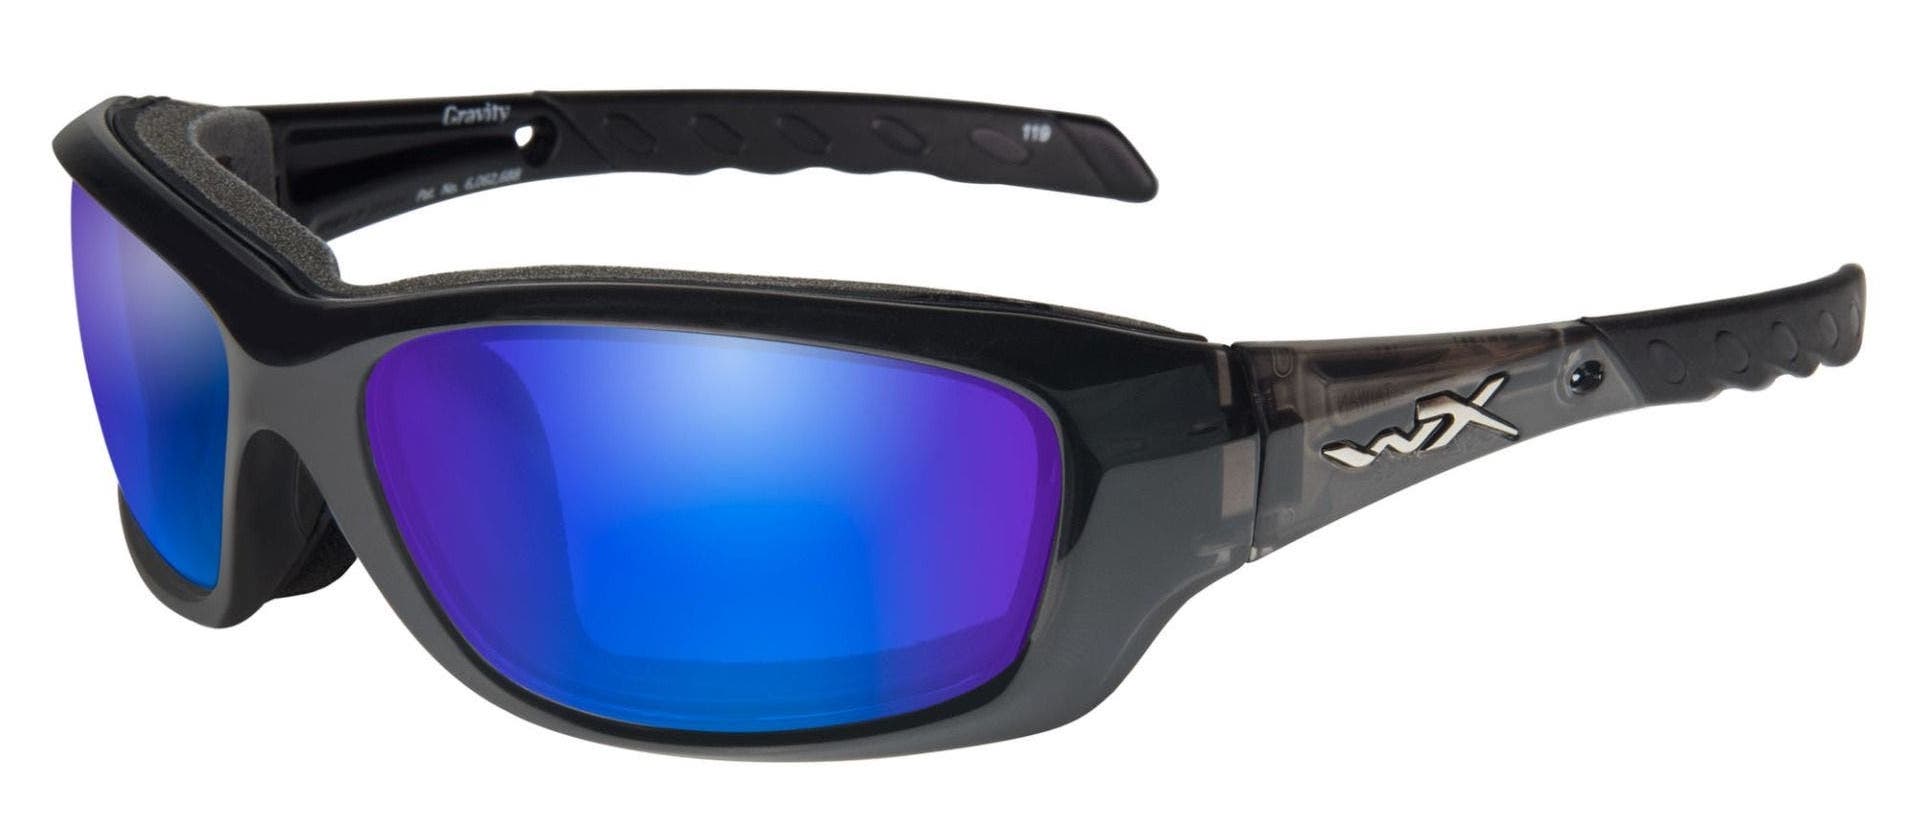 Wiley X Gravity wraparound sunglasses in black with blue mirror lenses.